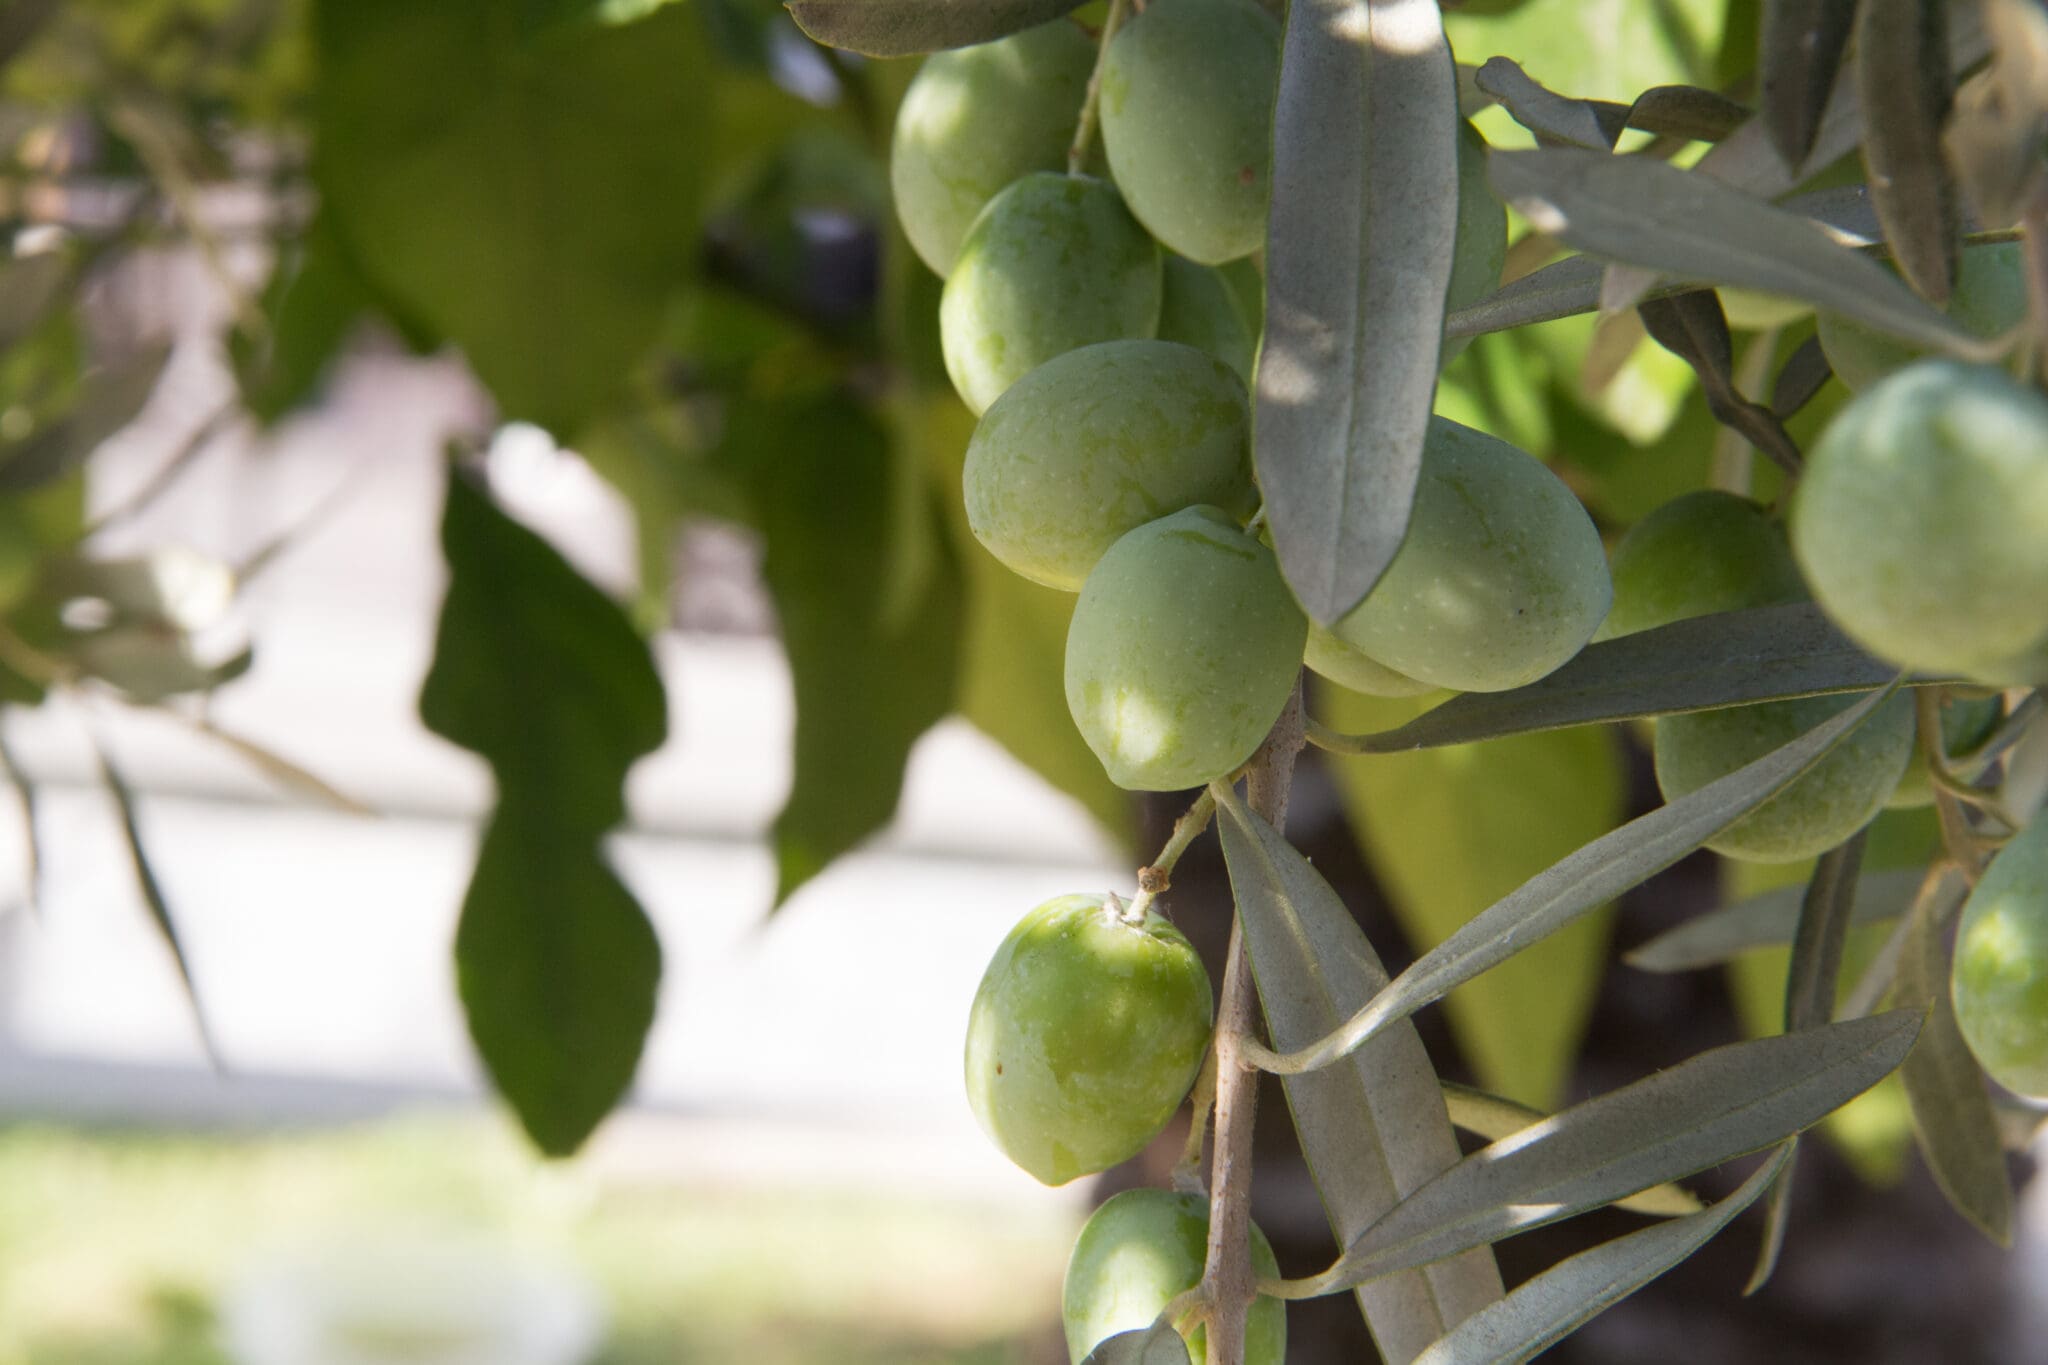 Olives on an olive tree branch - close up outdoors shot